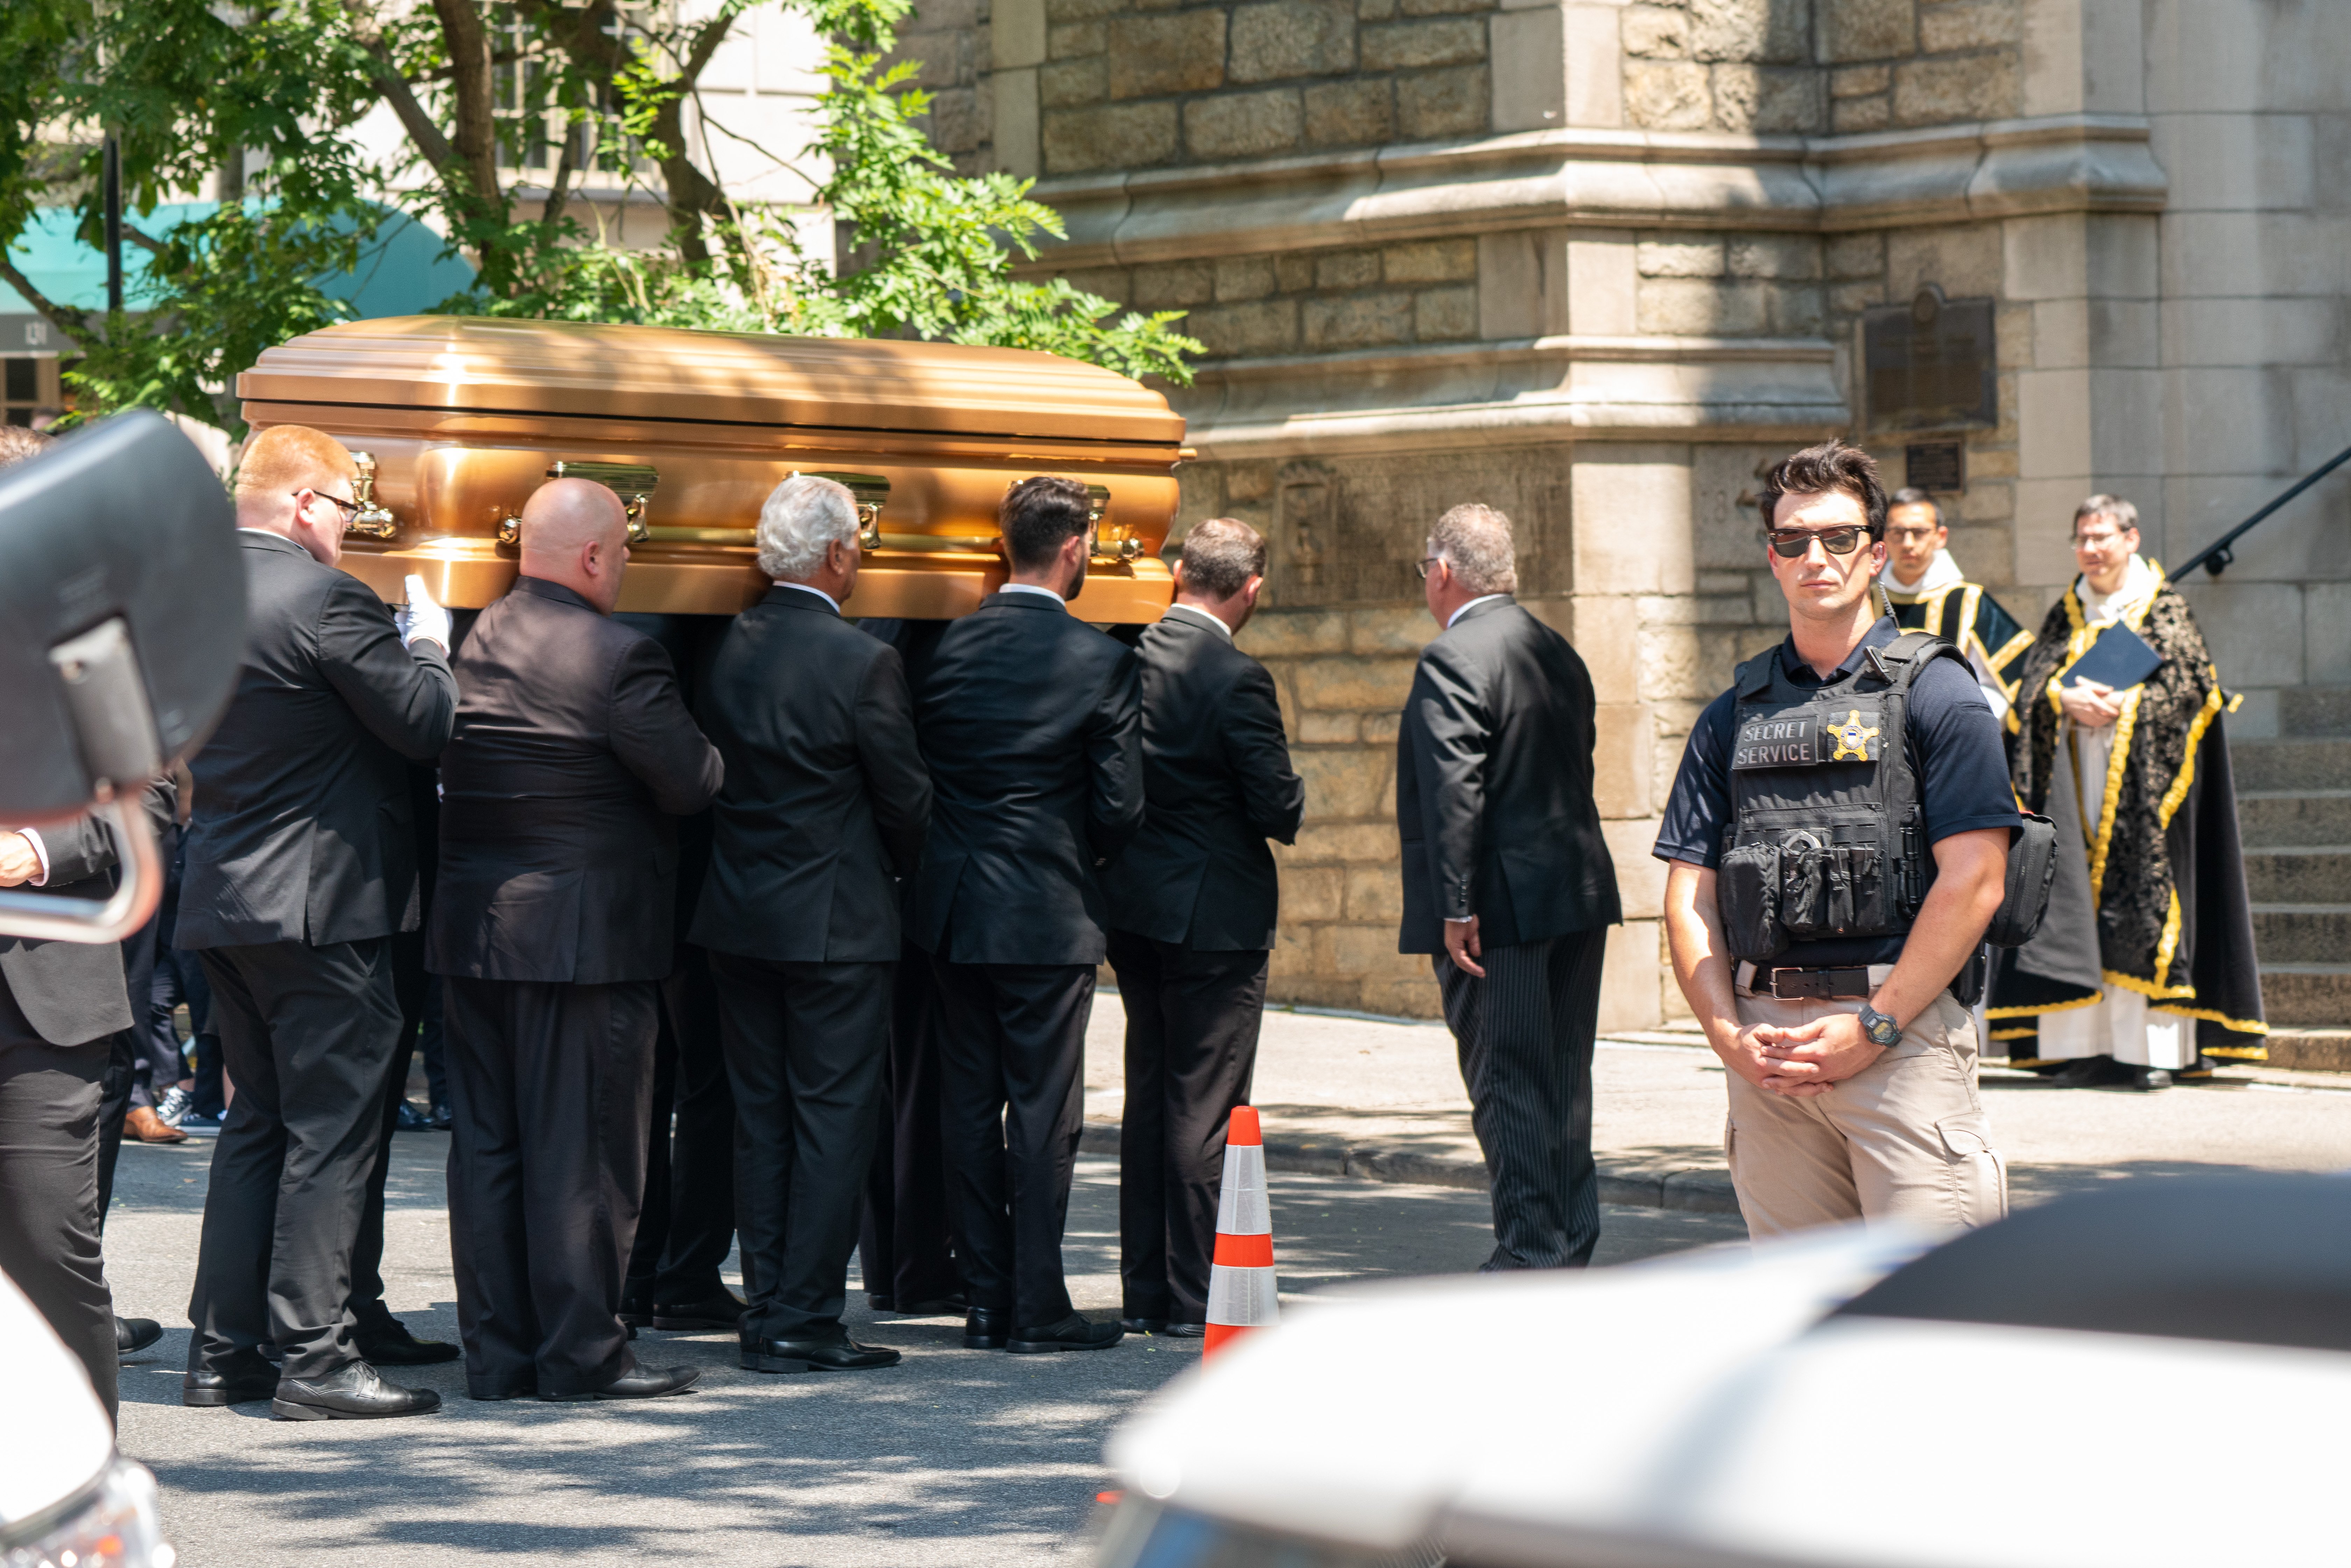 Pallbearers carrying the coffin of late Ivana Trump into the Church of St. Vincent Ferrer on July 20, 2022 in New York.┃Source: Getty Images